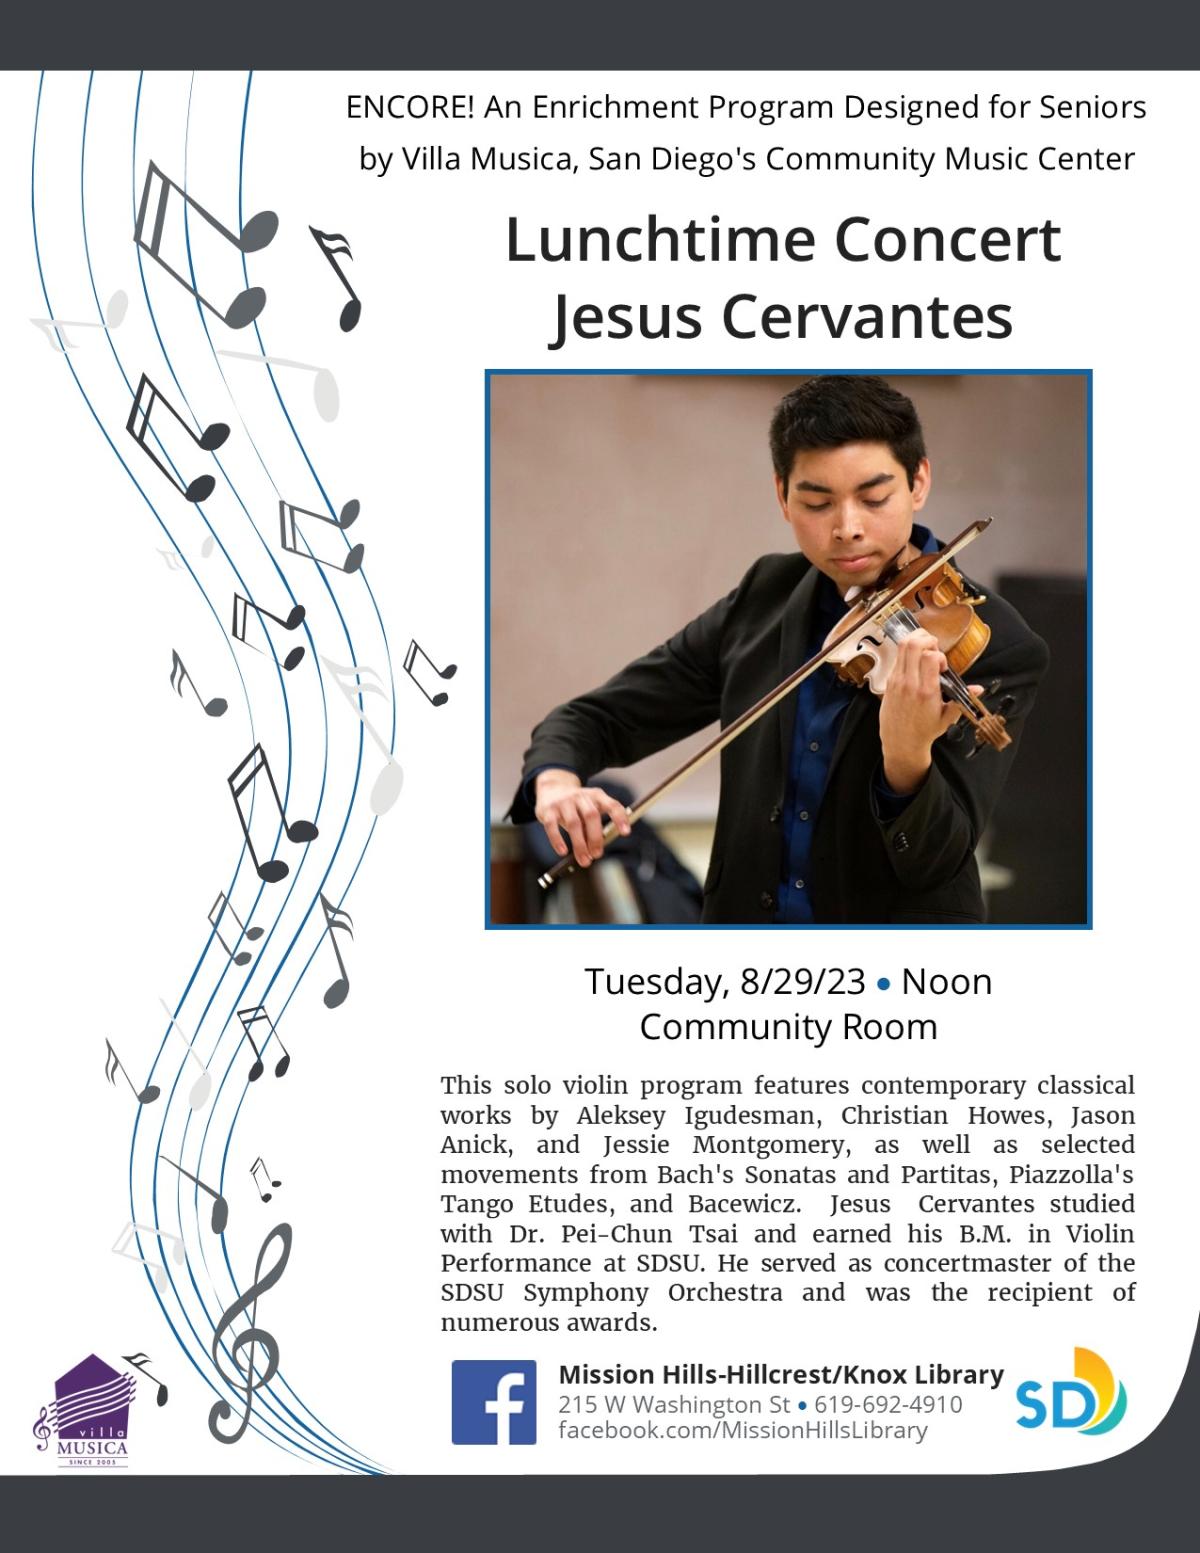 Flyer for concert with photo of Jesus Cervantes playing violin